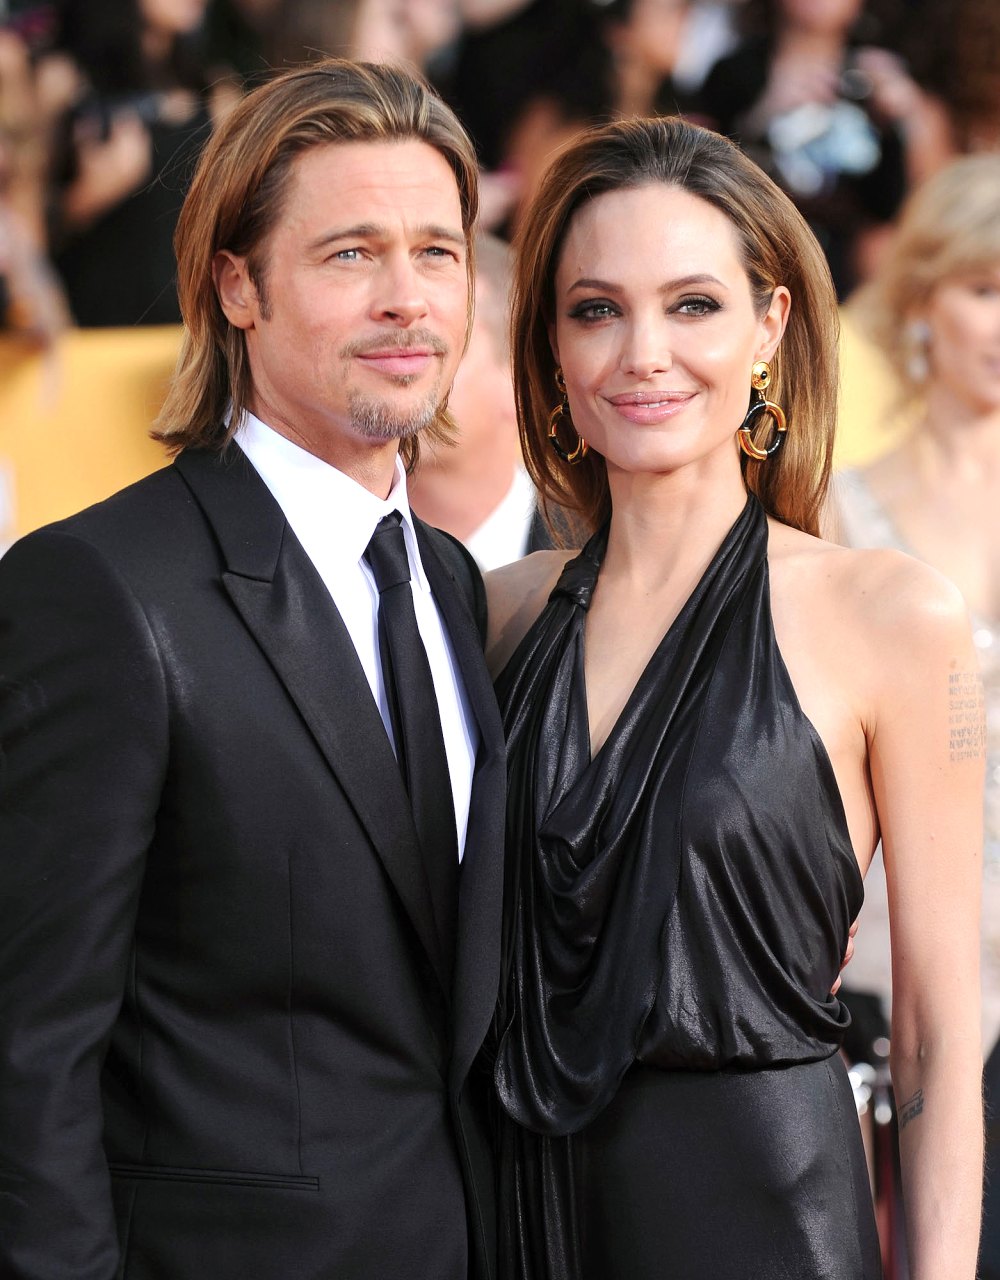 Brad Pitt and Angelina Jolie are preparing to finalize a lengthy divorce soon